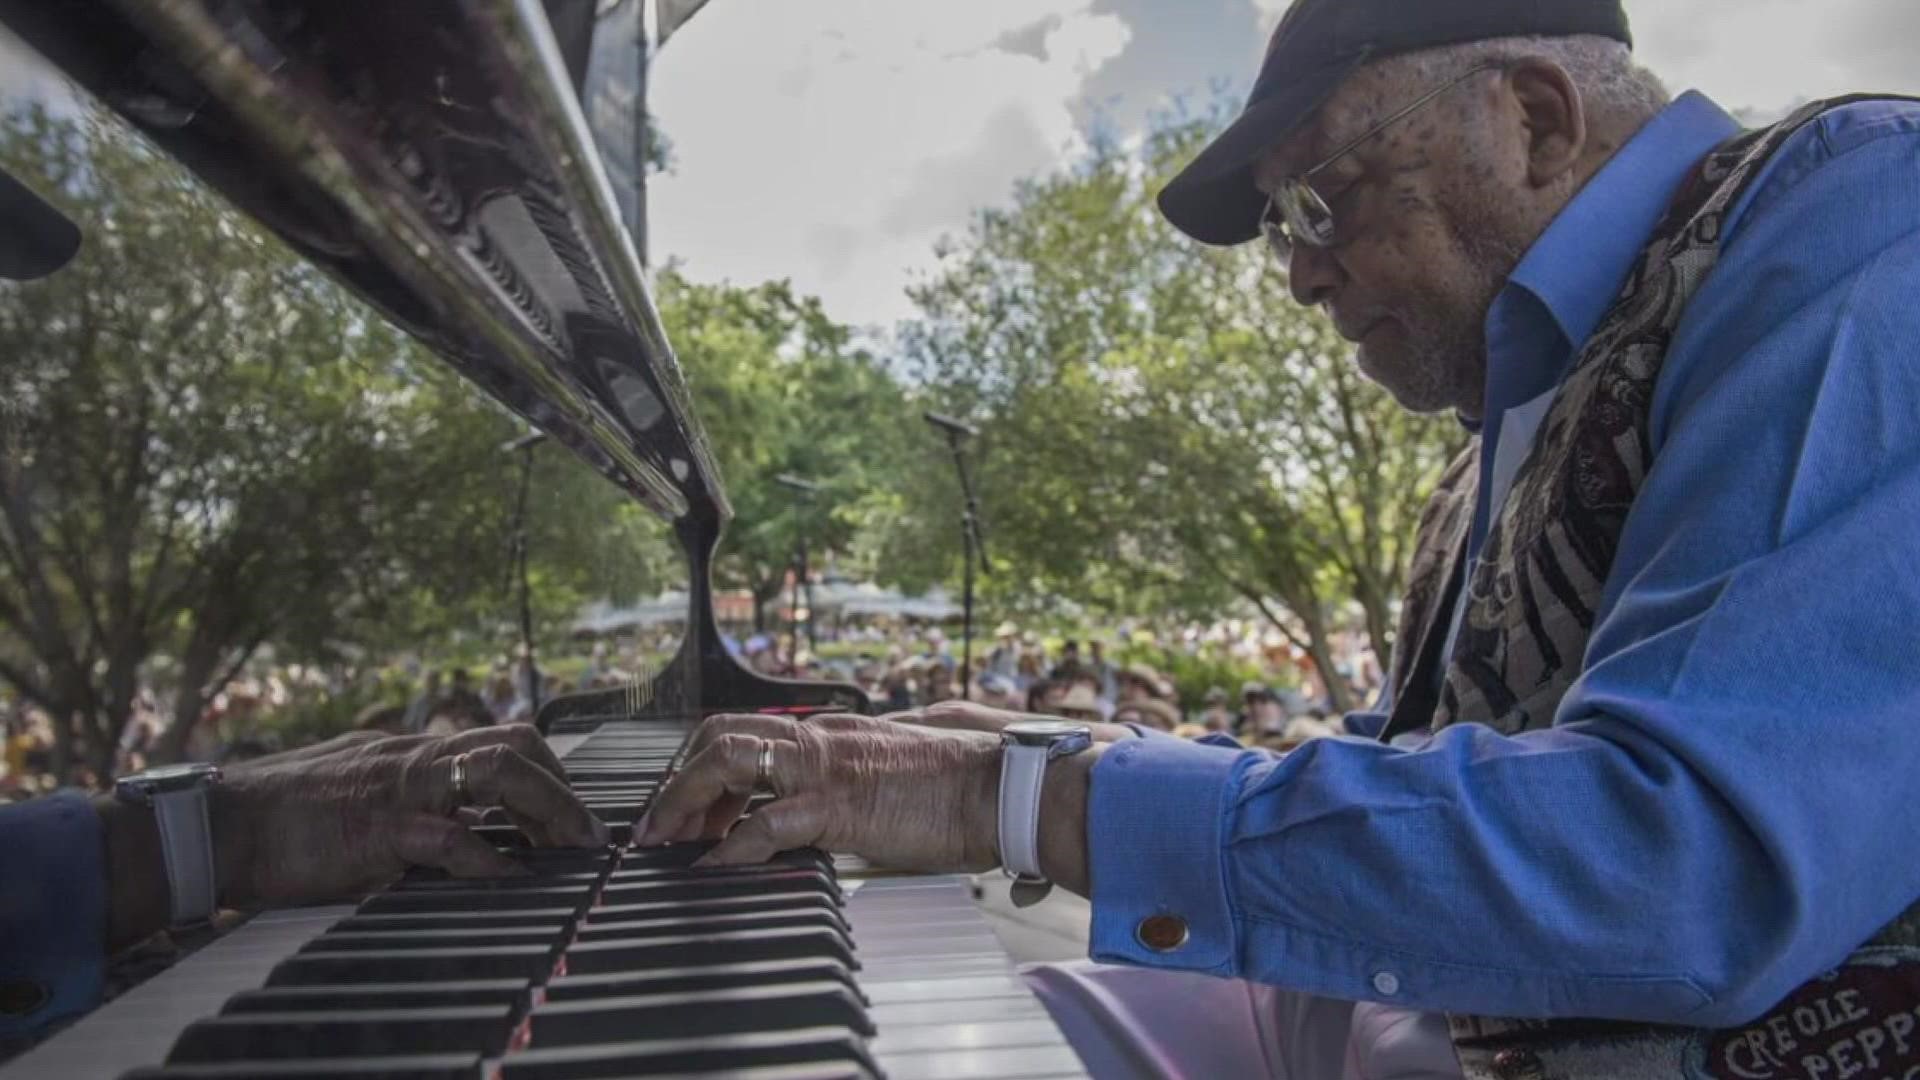 Ellis Marsalis, the patriarch of the musical Marsalis family, died two years ago from COVID but couldn't get a proper send off due to restrictions.